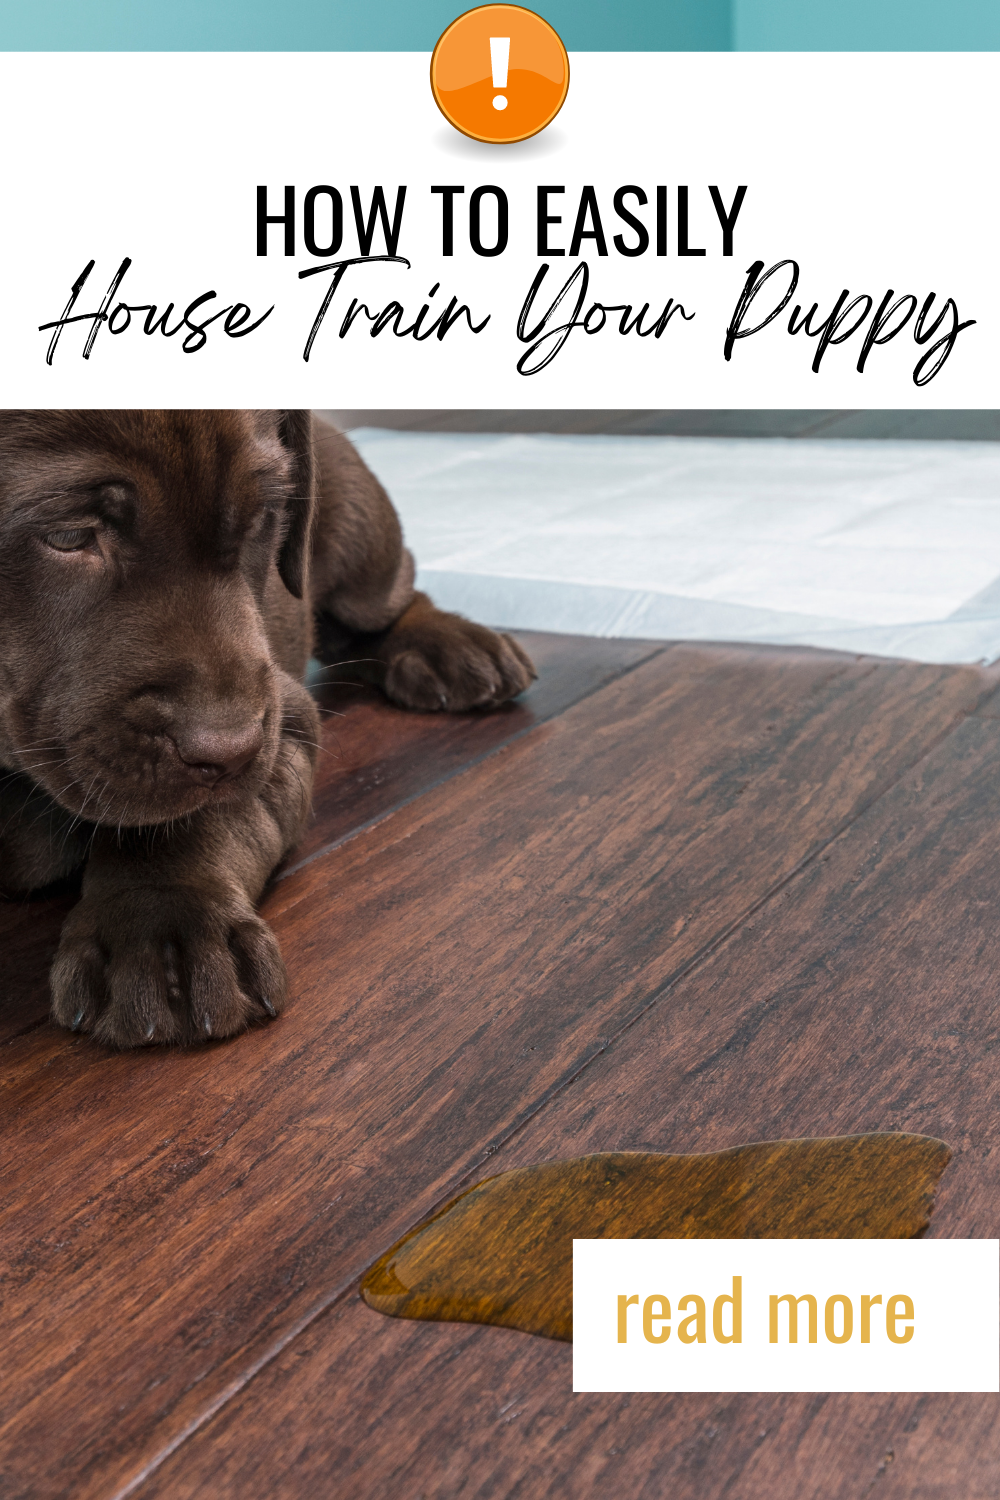 how to house train your puppy